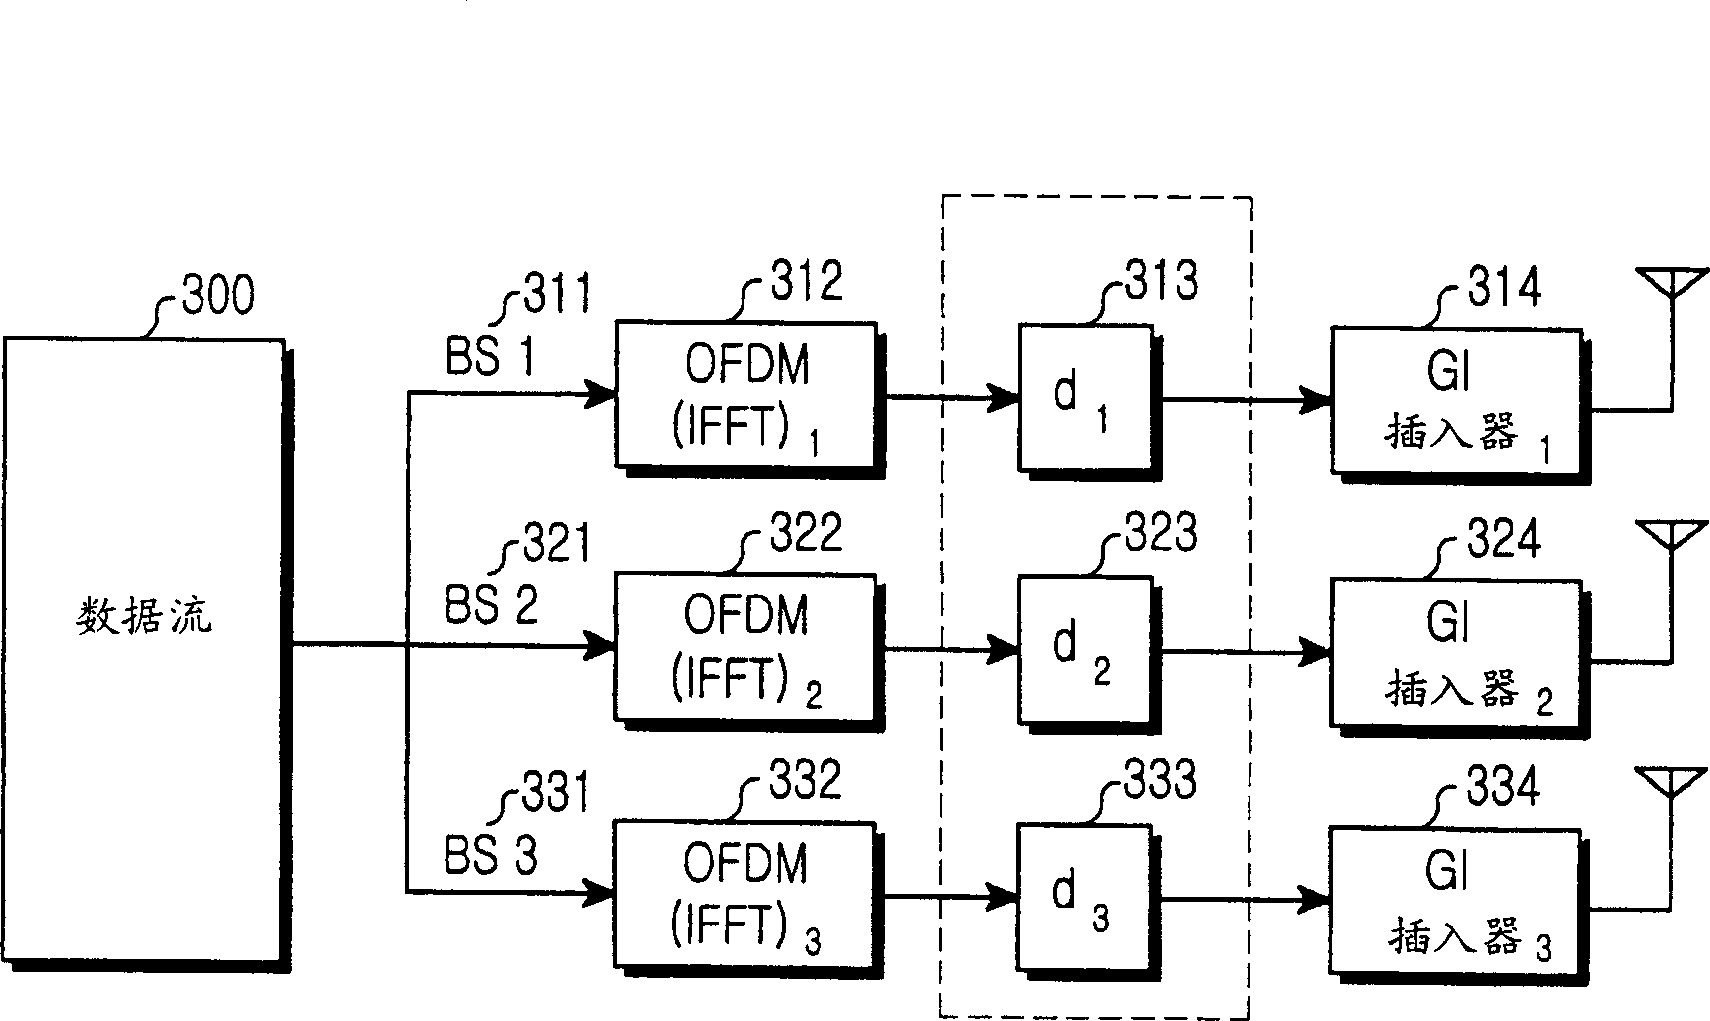 Transmission apparatus and method for a base station using block coding and cyclic delay diversity techniques in an OFDM mobile communication system